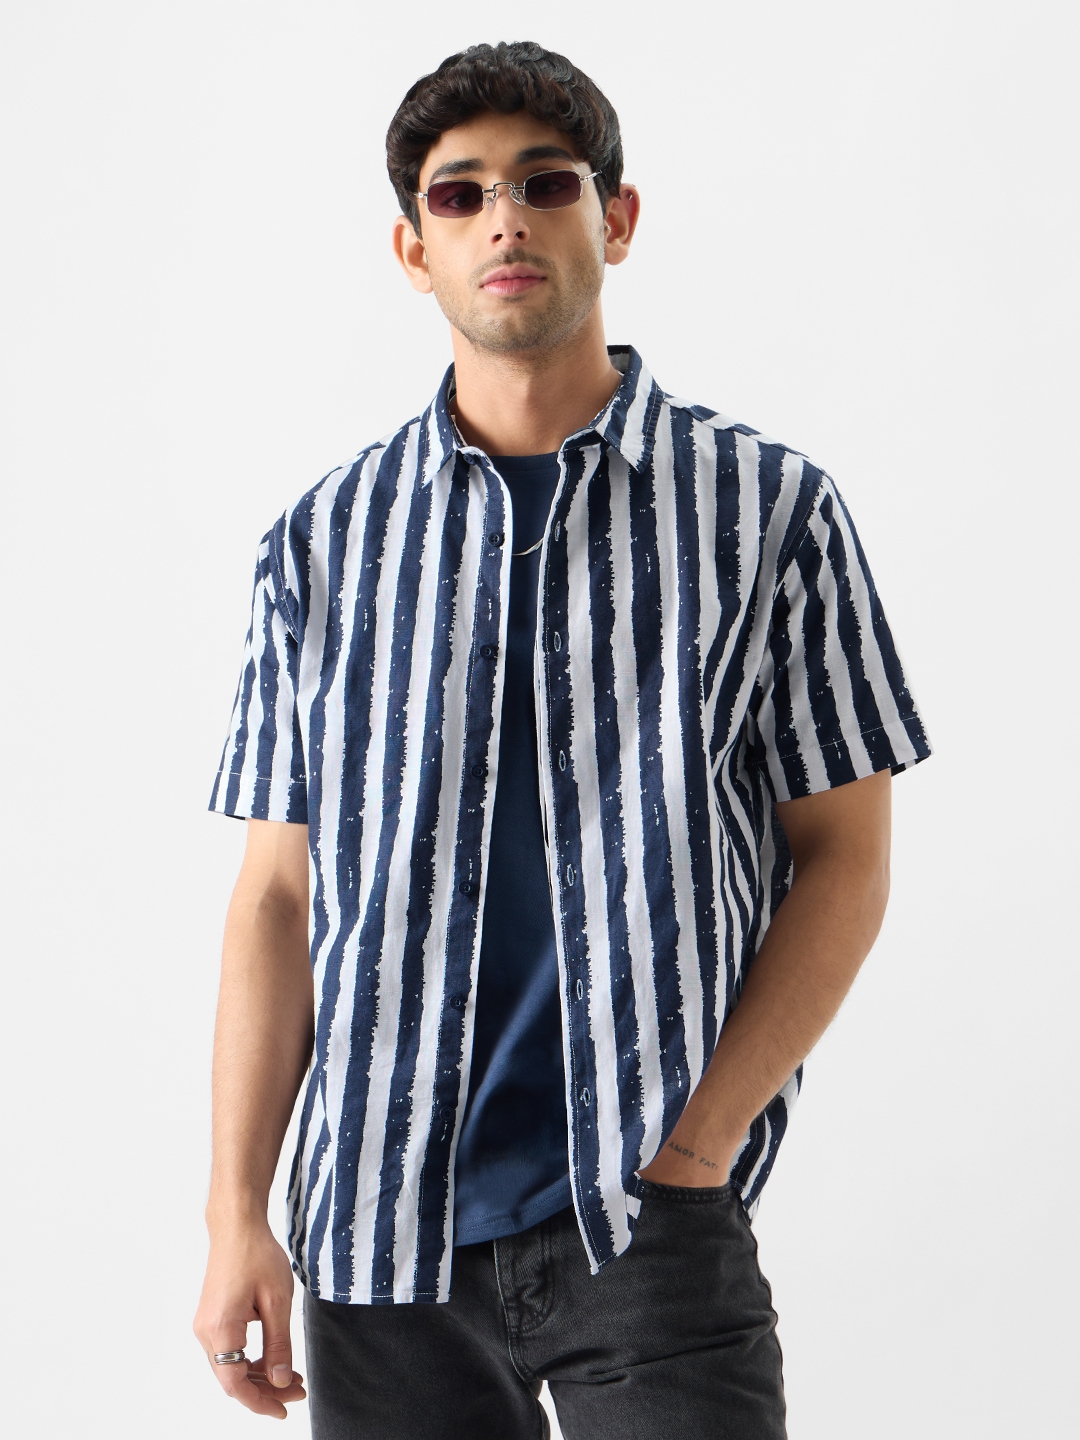 The Souled Store | Men's Stripes: Midnight Blue Summer Shirts